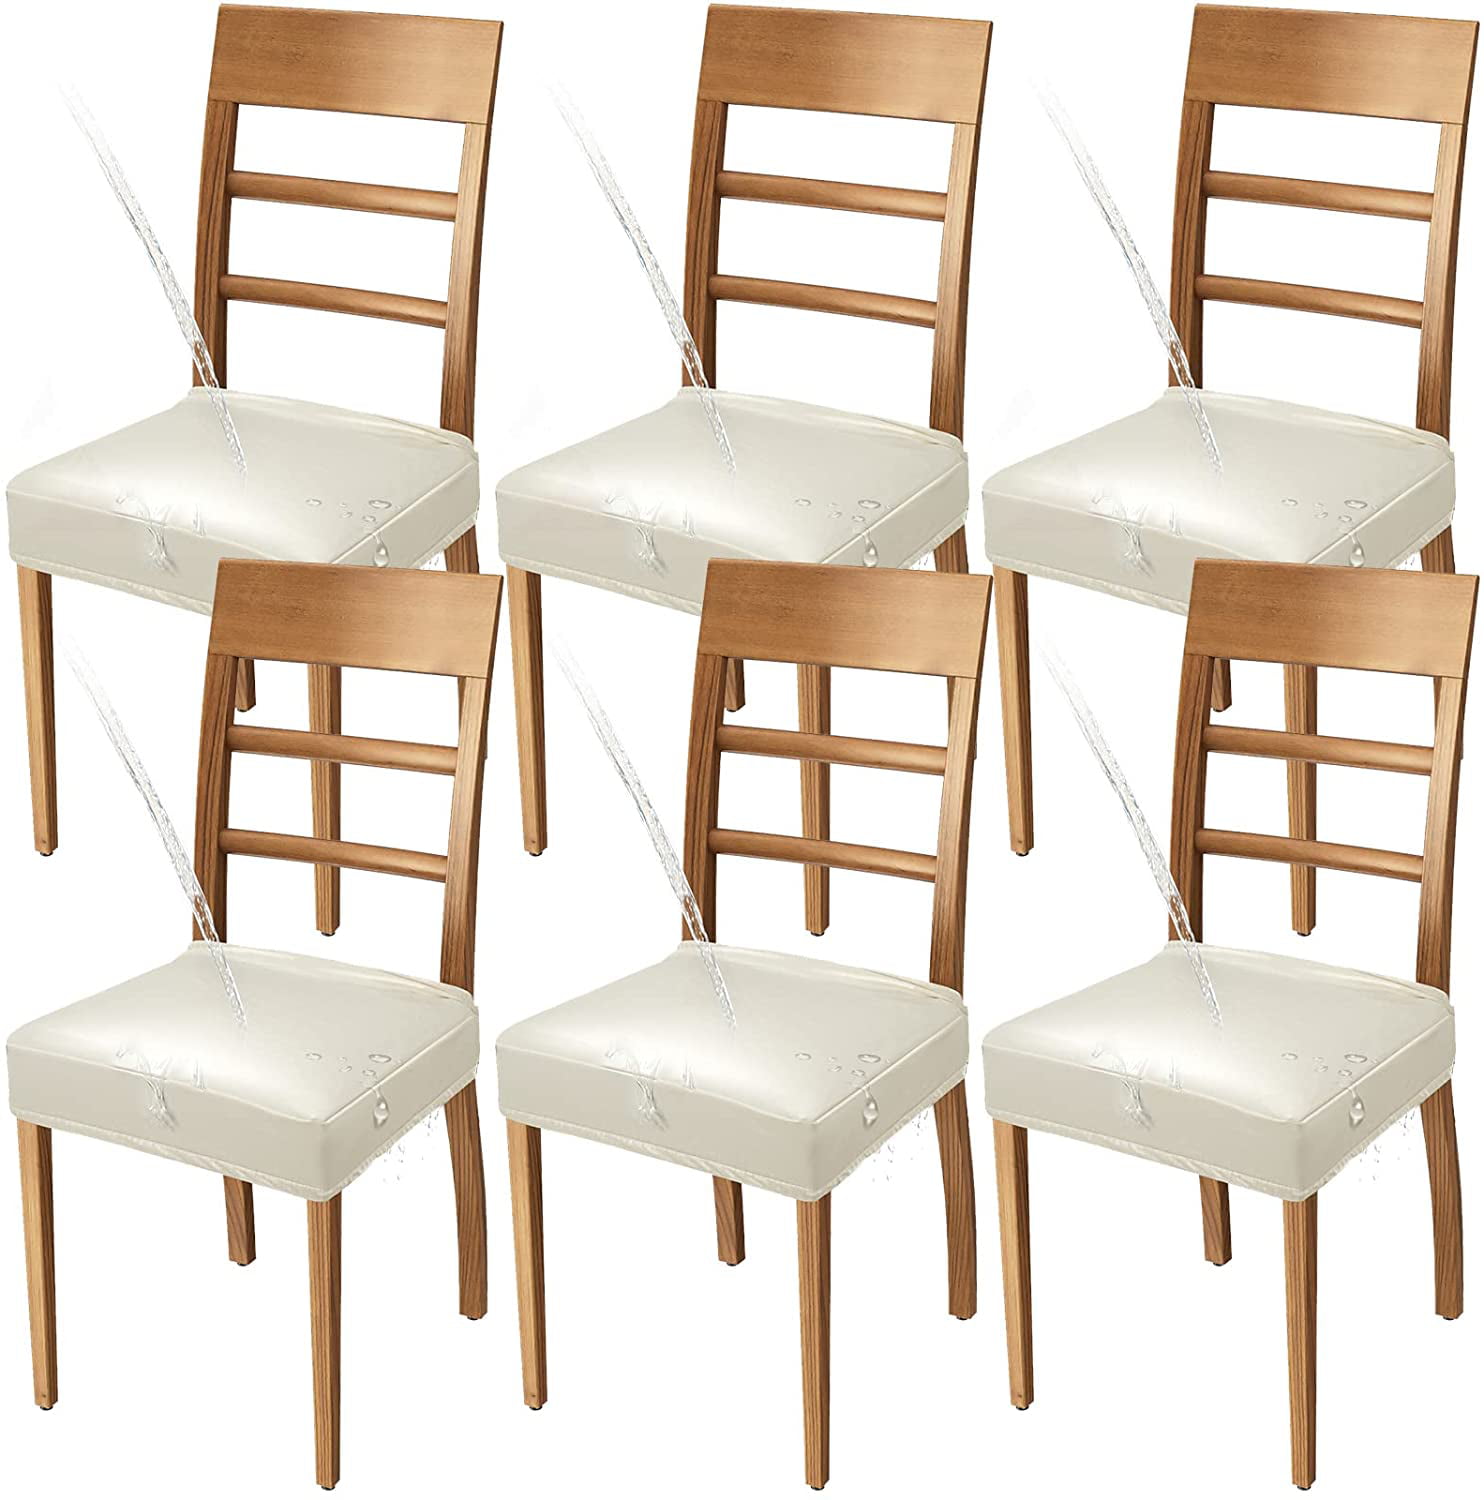 Details about   1PC Waterproof Elastic Chair Cover Case Stretch Dining Room Slipcover Protector 